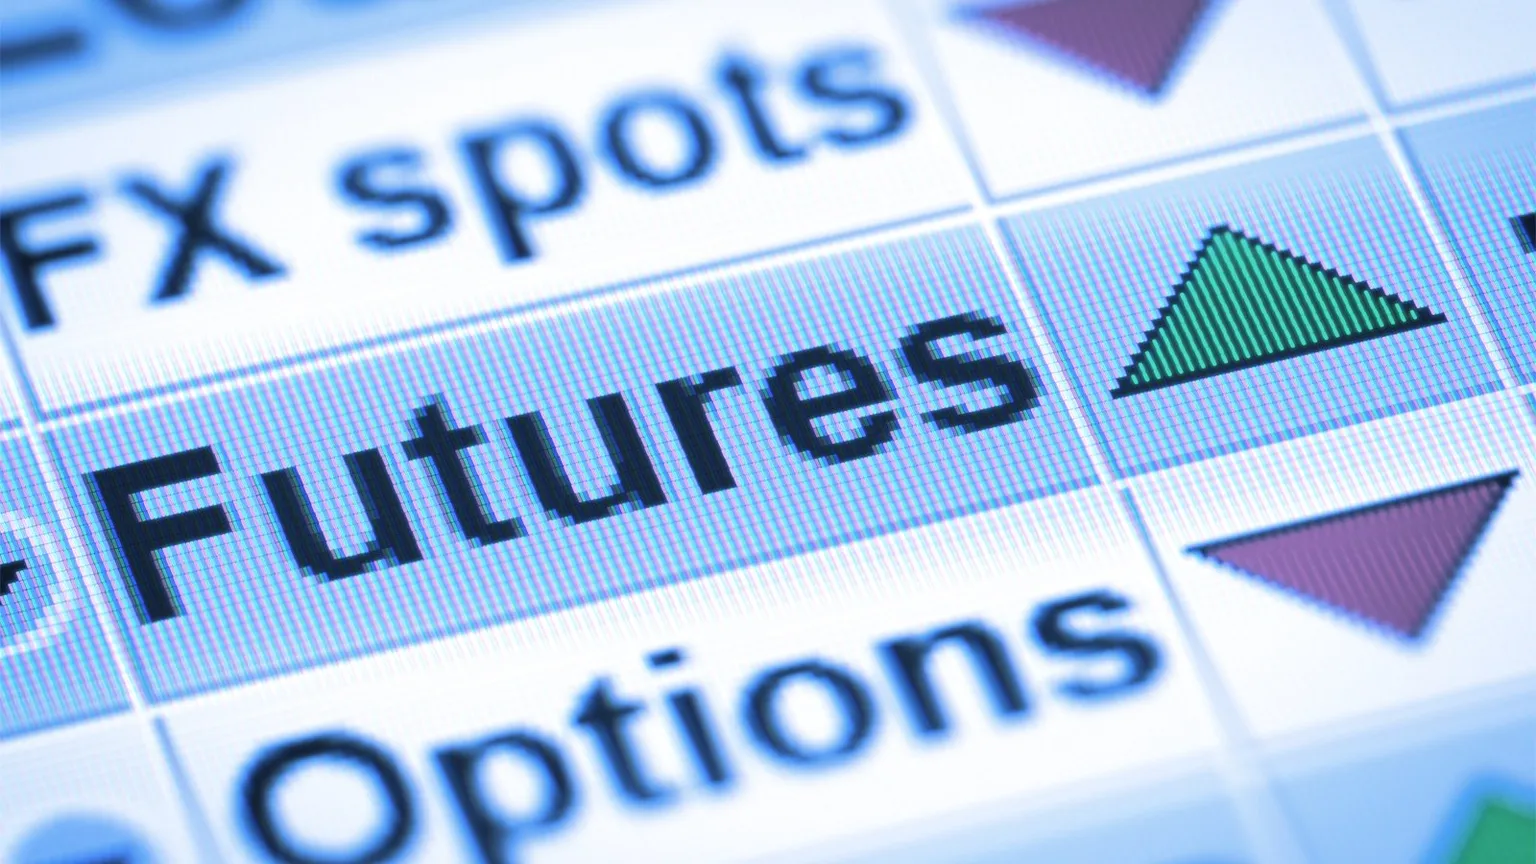 Big bets on Bitcoin Futures. IMAGE: Shutterstock